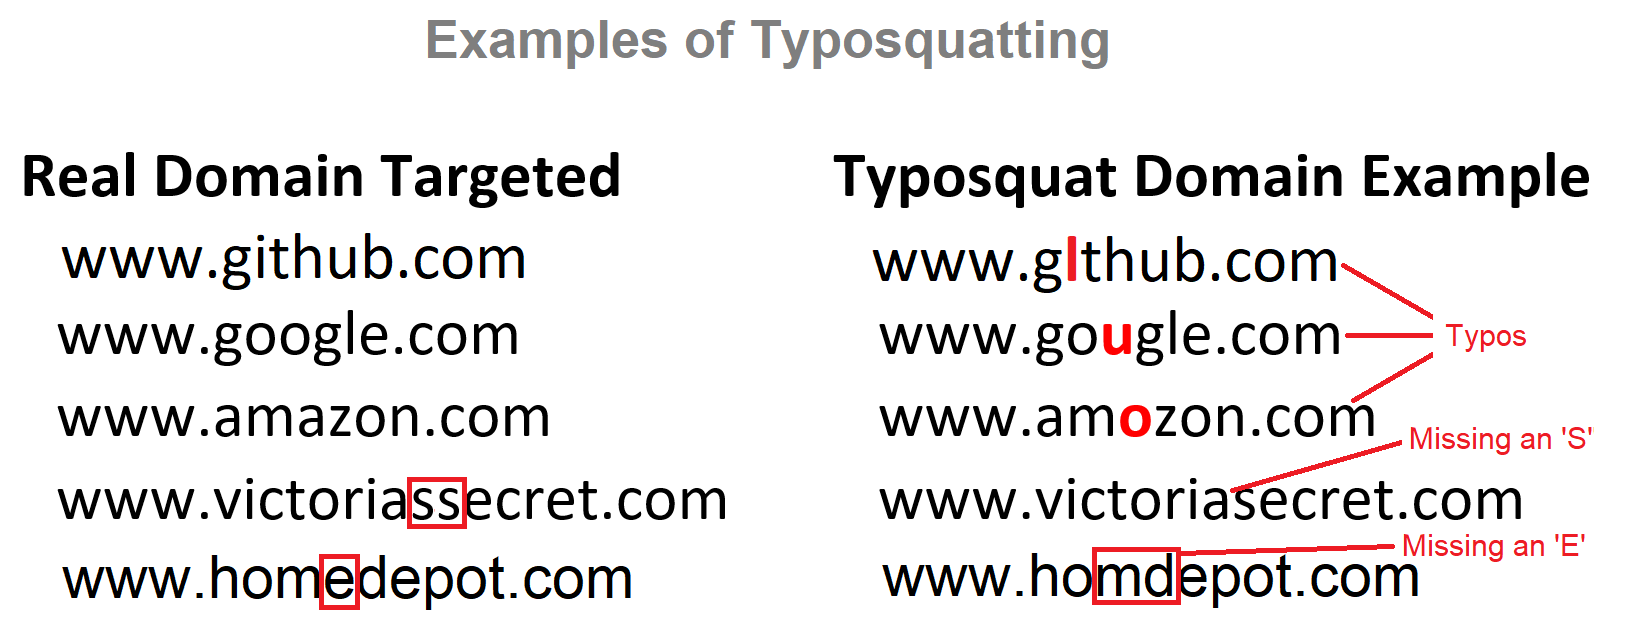 Typosquatting involves buying the domains of popular websites except with common typos in them, like amozon instead of amazon.